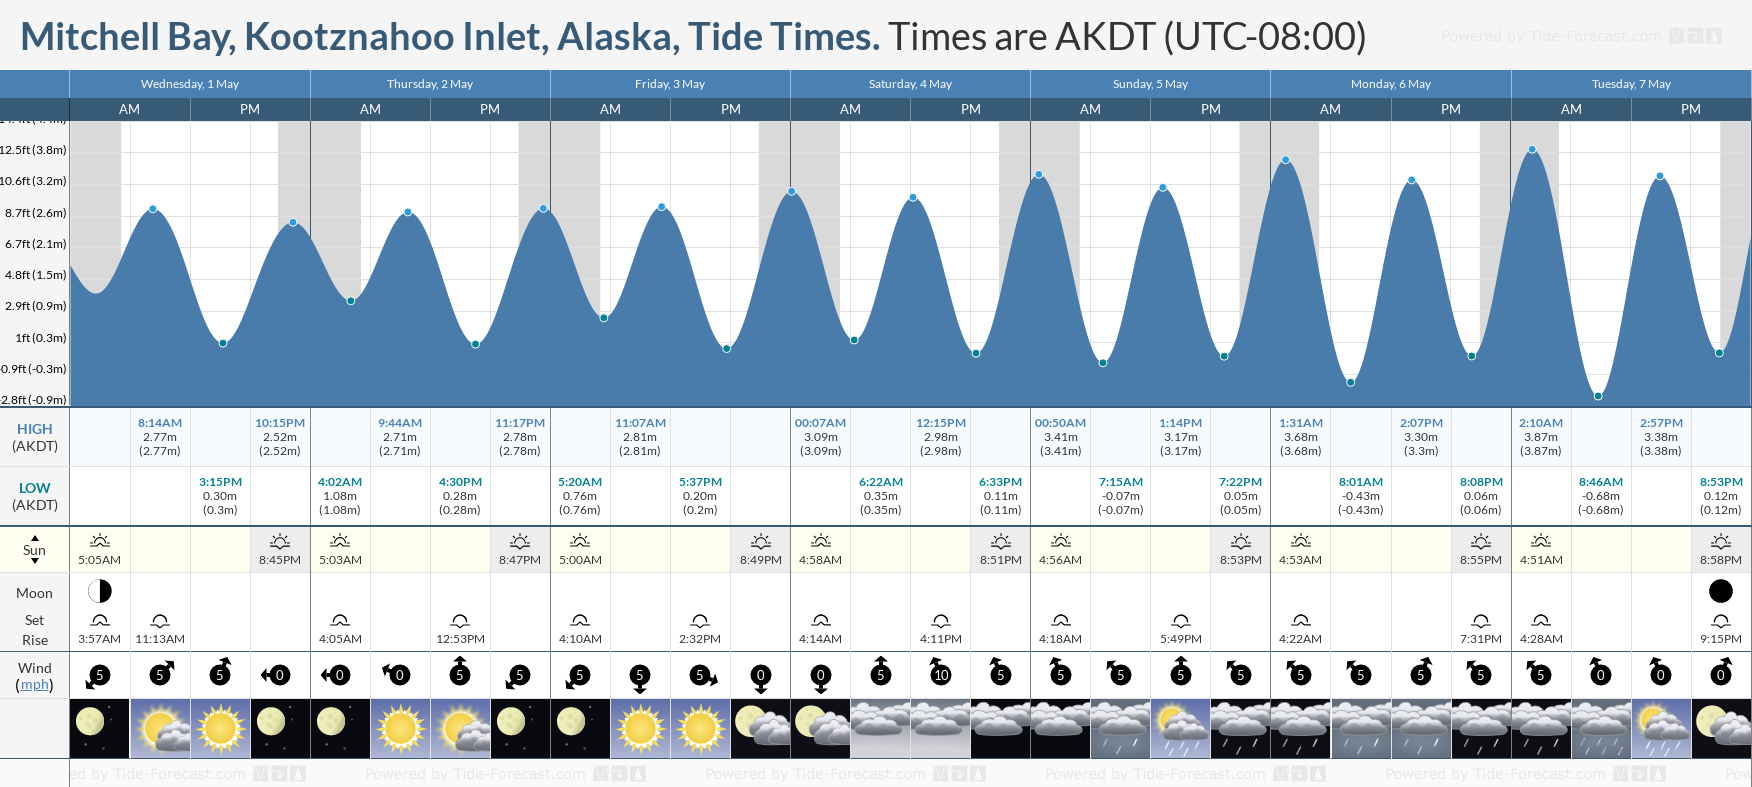 Mitchell Bay, Kootznahoo Inlet, Alaska Tide Chart including high and low tide tide times for the next 7 days